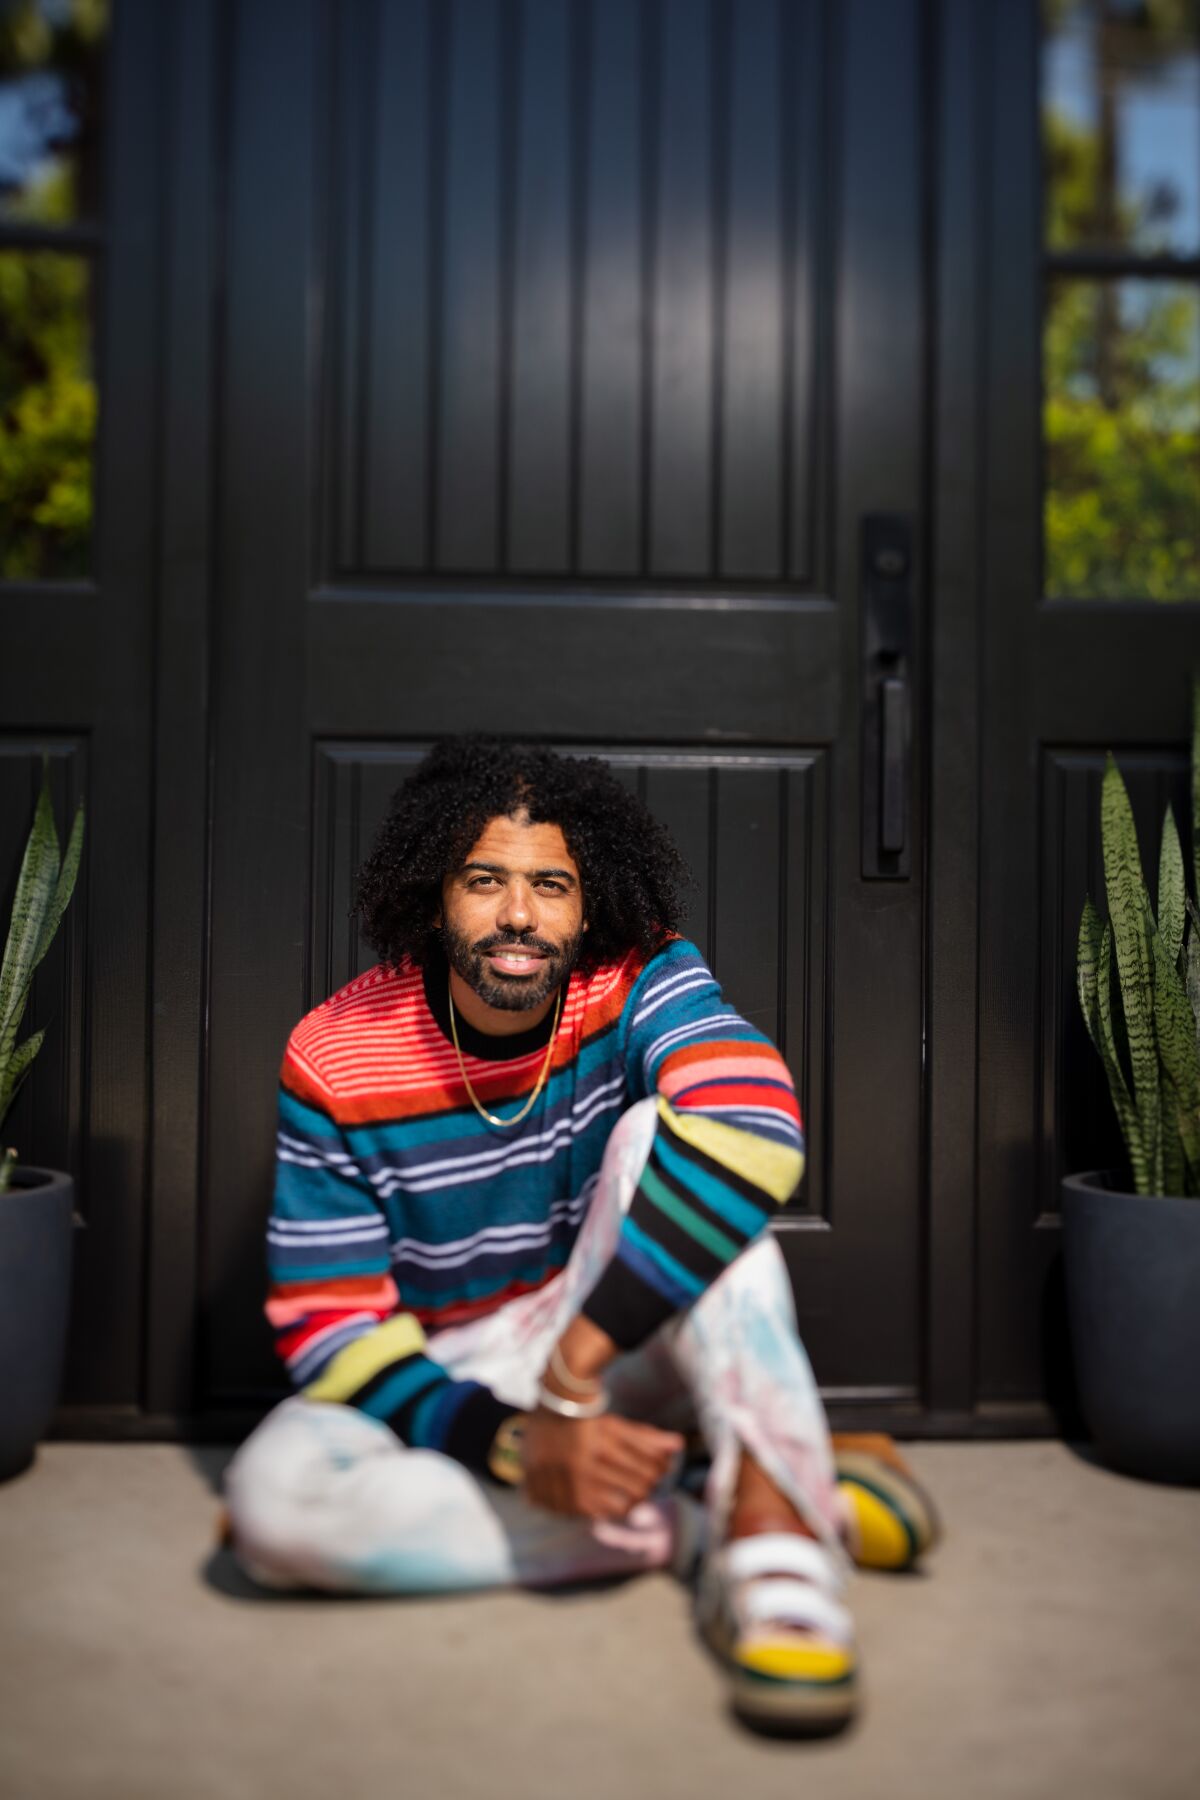 Actor, rapper and songwriter Daveed Diggs is photographed at his home in Los Angeles on May 20, 2020.